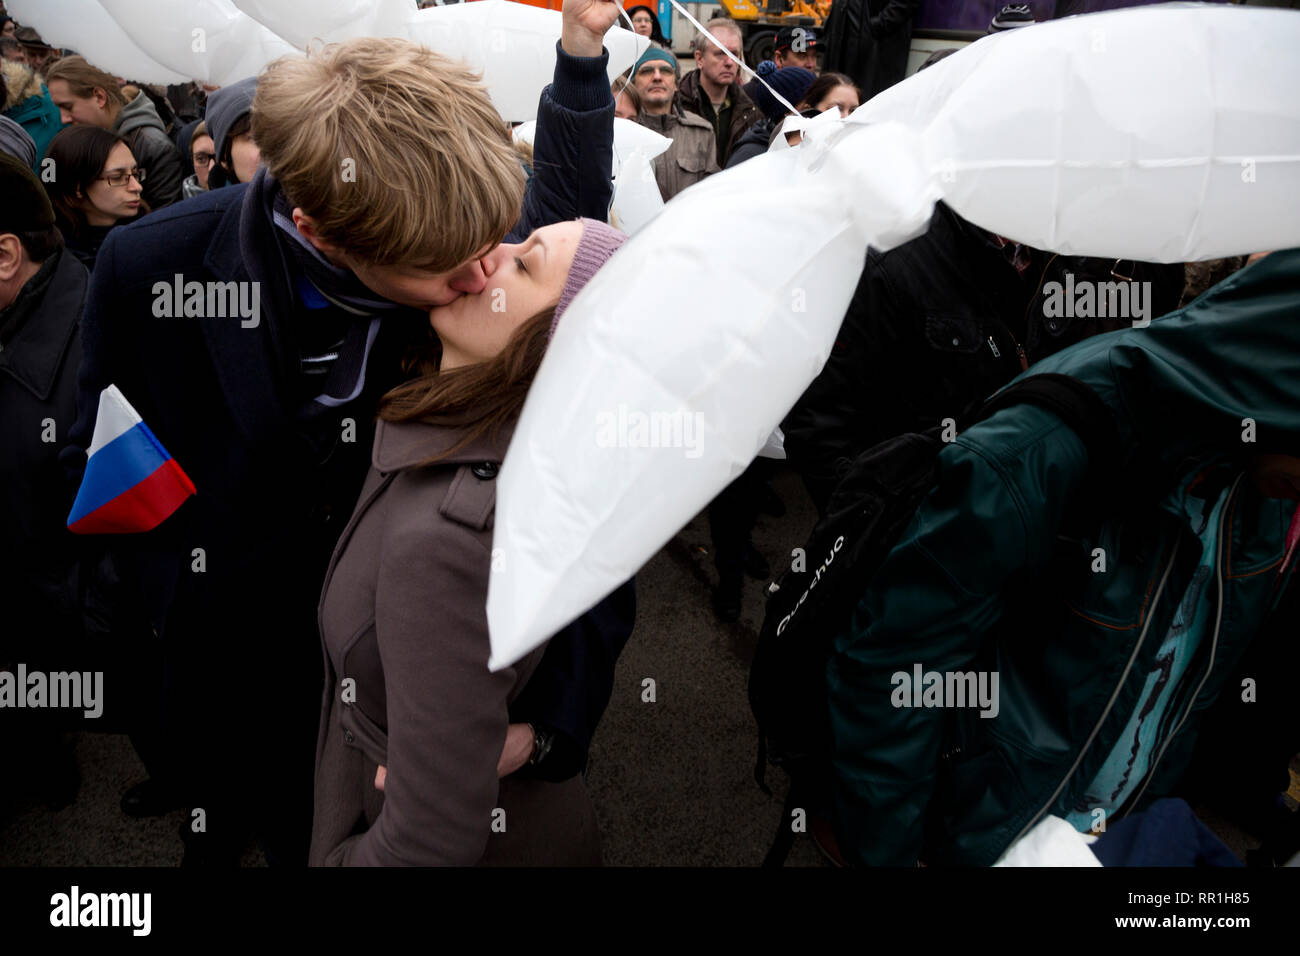 People carry balls in the form of white doves in 'March of peace' in central Moscow in support of the Ukrainian people and against a war March 15, 201 Stock Photo